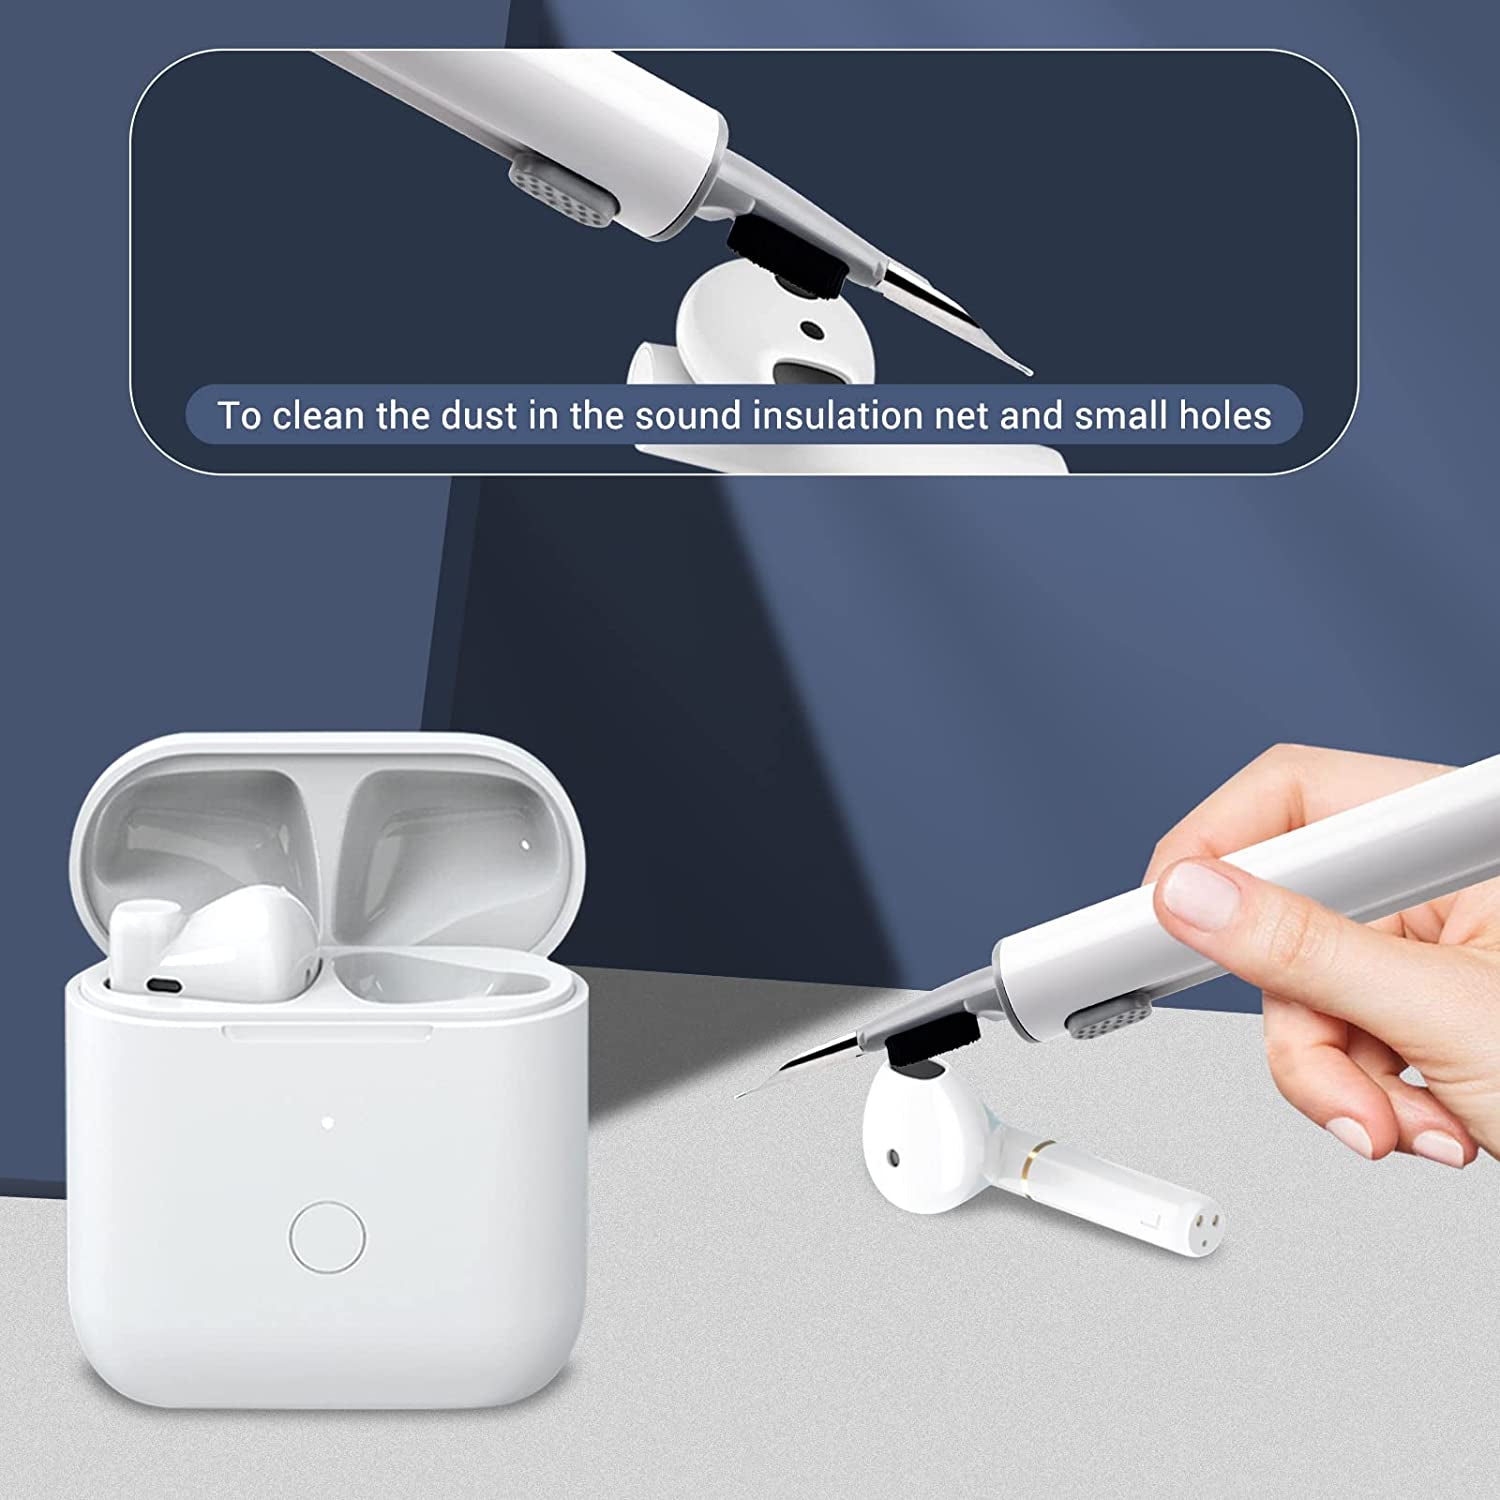 Introducing the 2023 New Cleaner Kit for AirPods Pro - Say goodbye to dust and dirt with our Multifunction Cleaning Pen! 🧹